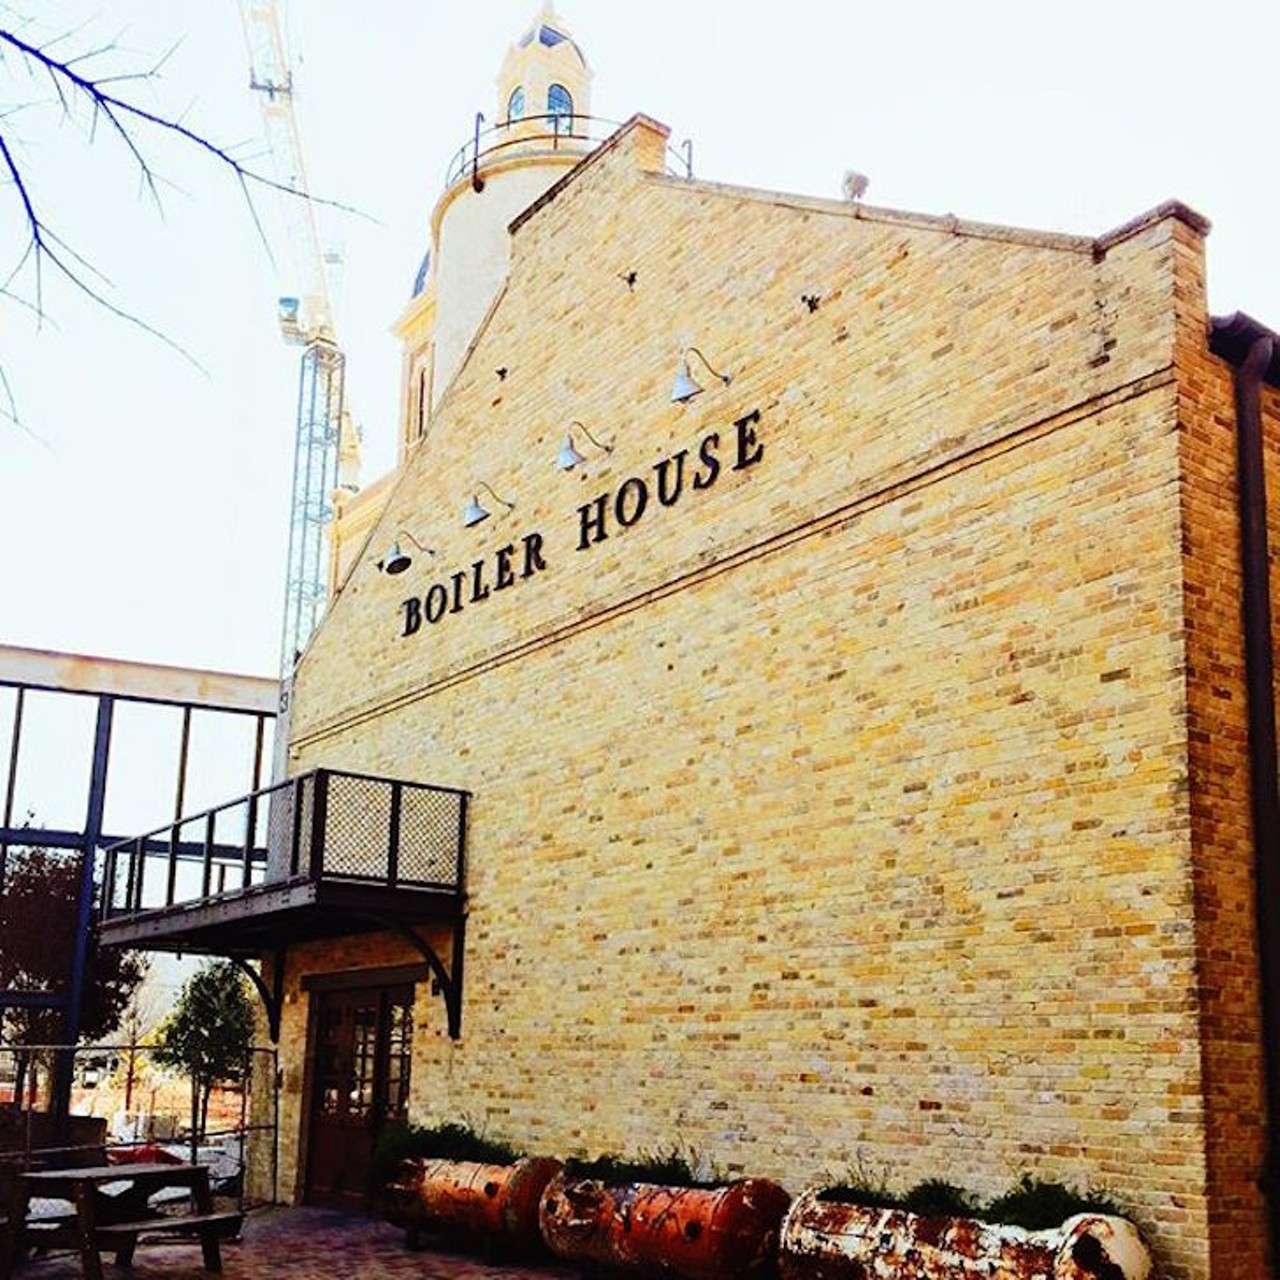 Boiler House 
312 Pearl Pkwy. #3, (210) 354-4644, boilerhousesa.com
Boiler House will offer Valentine&#146;s themed specials on Friday and Saturday as well as a three-course option prix fixe menu on Valentine&#146;s Night from 6 to 9 p.m. The prix fixe menu is $59 per person with optional wine pairings for an additional $29. 
Photo via Instagram (kelseyleehanson)